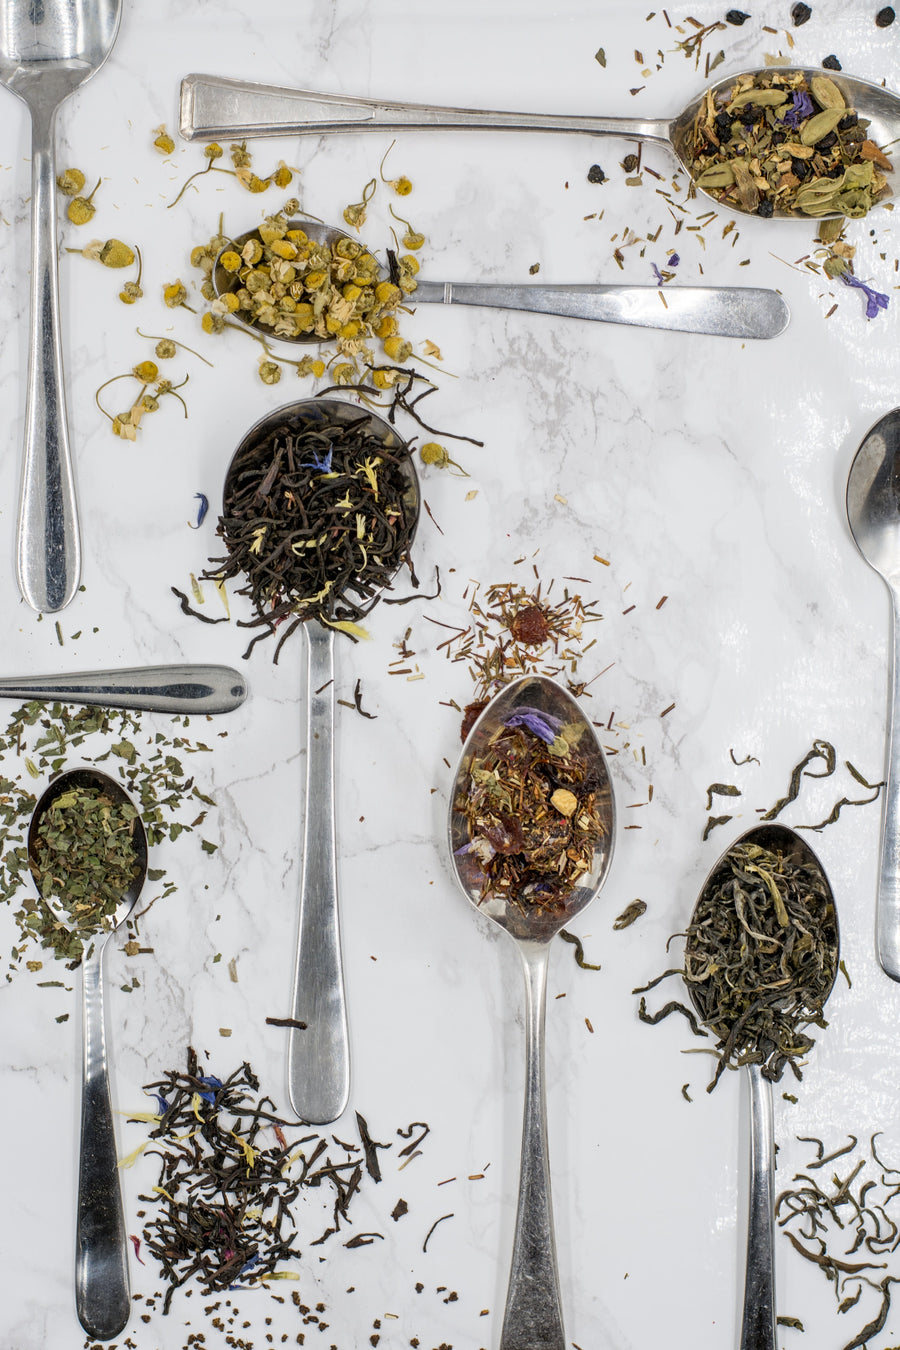 Tea Time for Aunt Flo: How Dandelion Root and Raspberry Leaf Tea Can Ease PMS